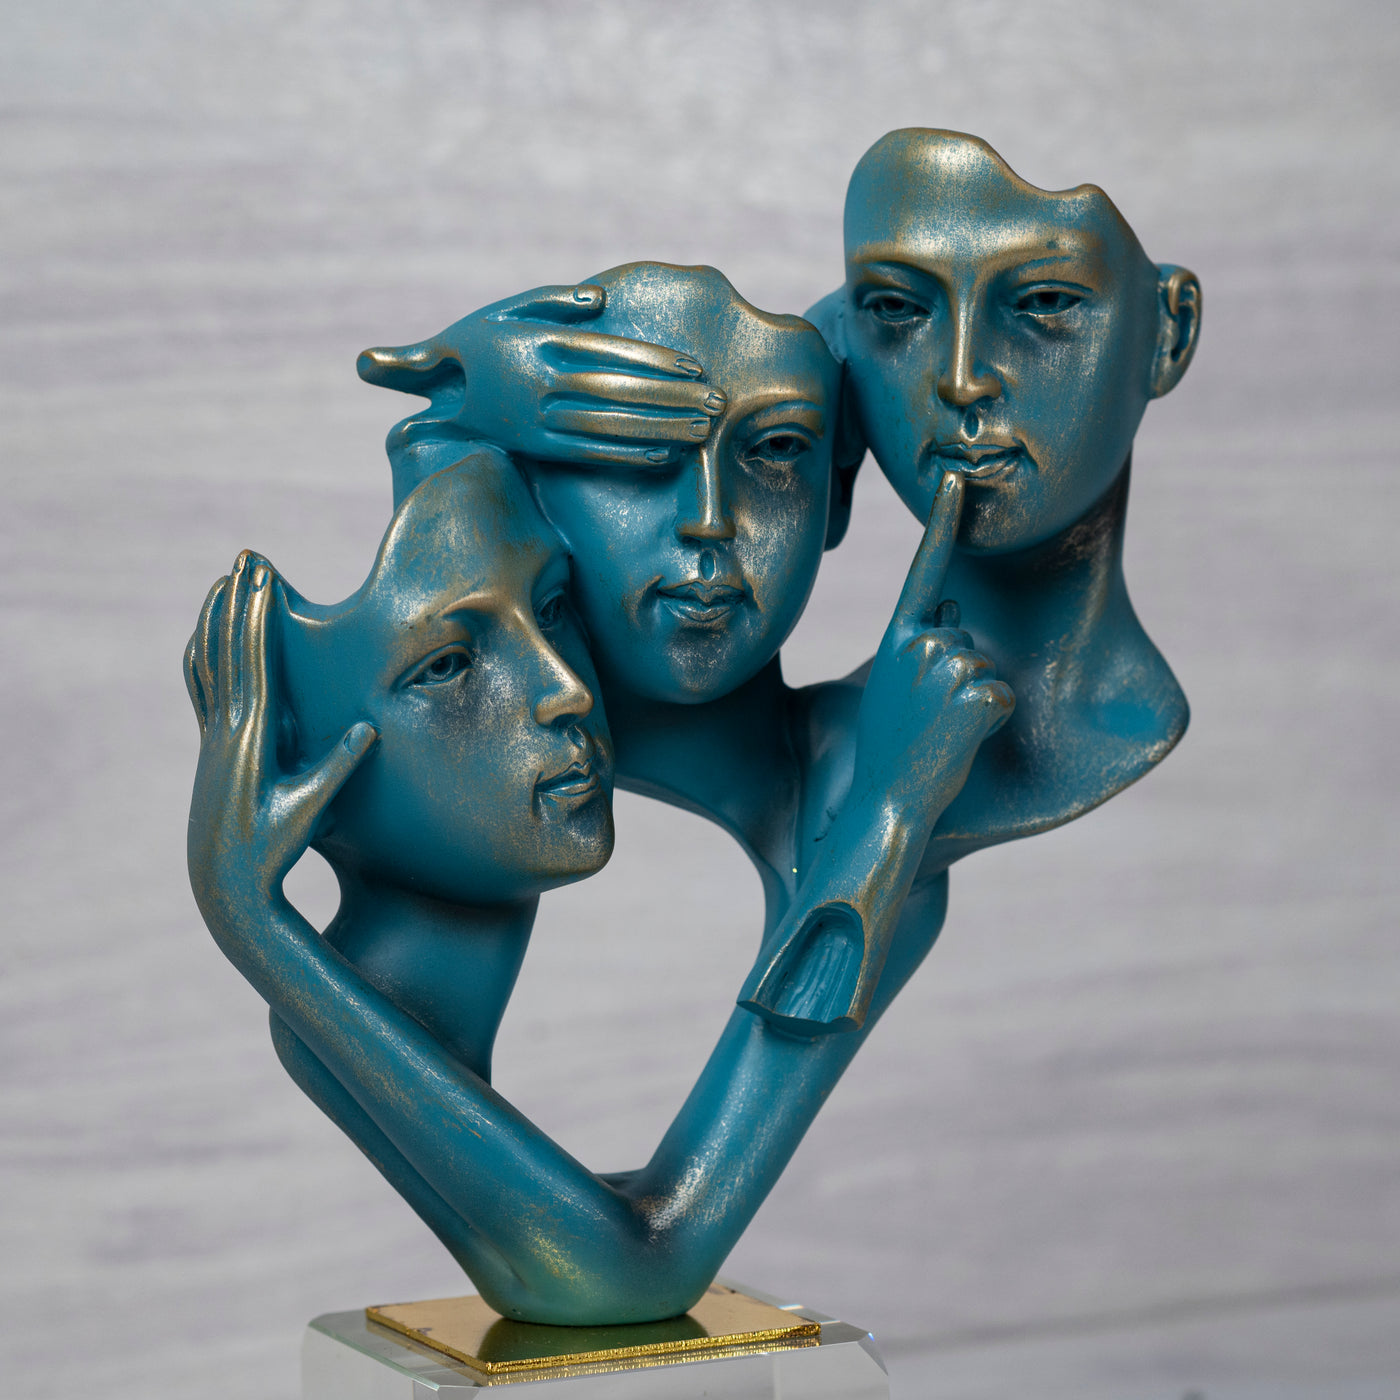 Teal faces statue by Home 360